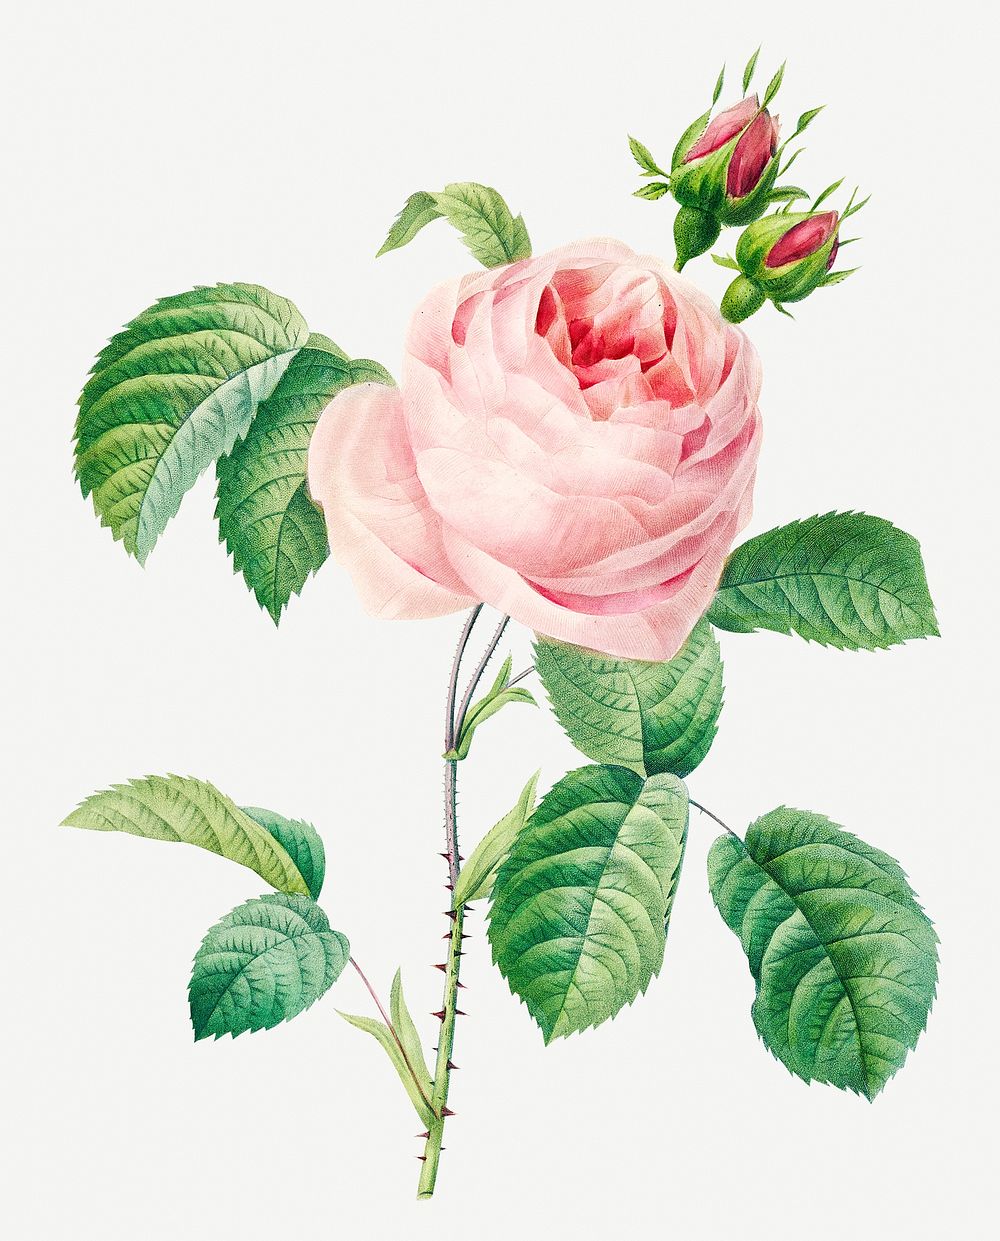 Cabbage rose flower psd botanical illustration, remixed from artworks by Pierre-Joseph Redout&eacute;